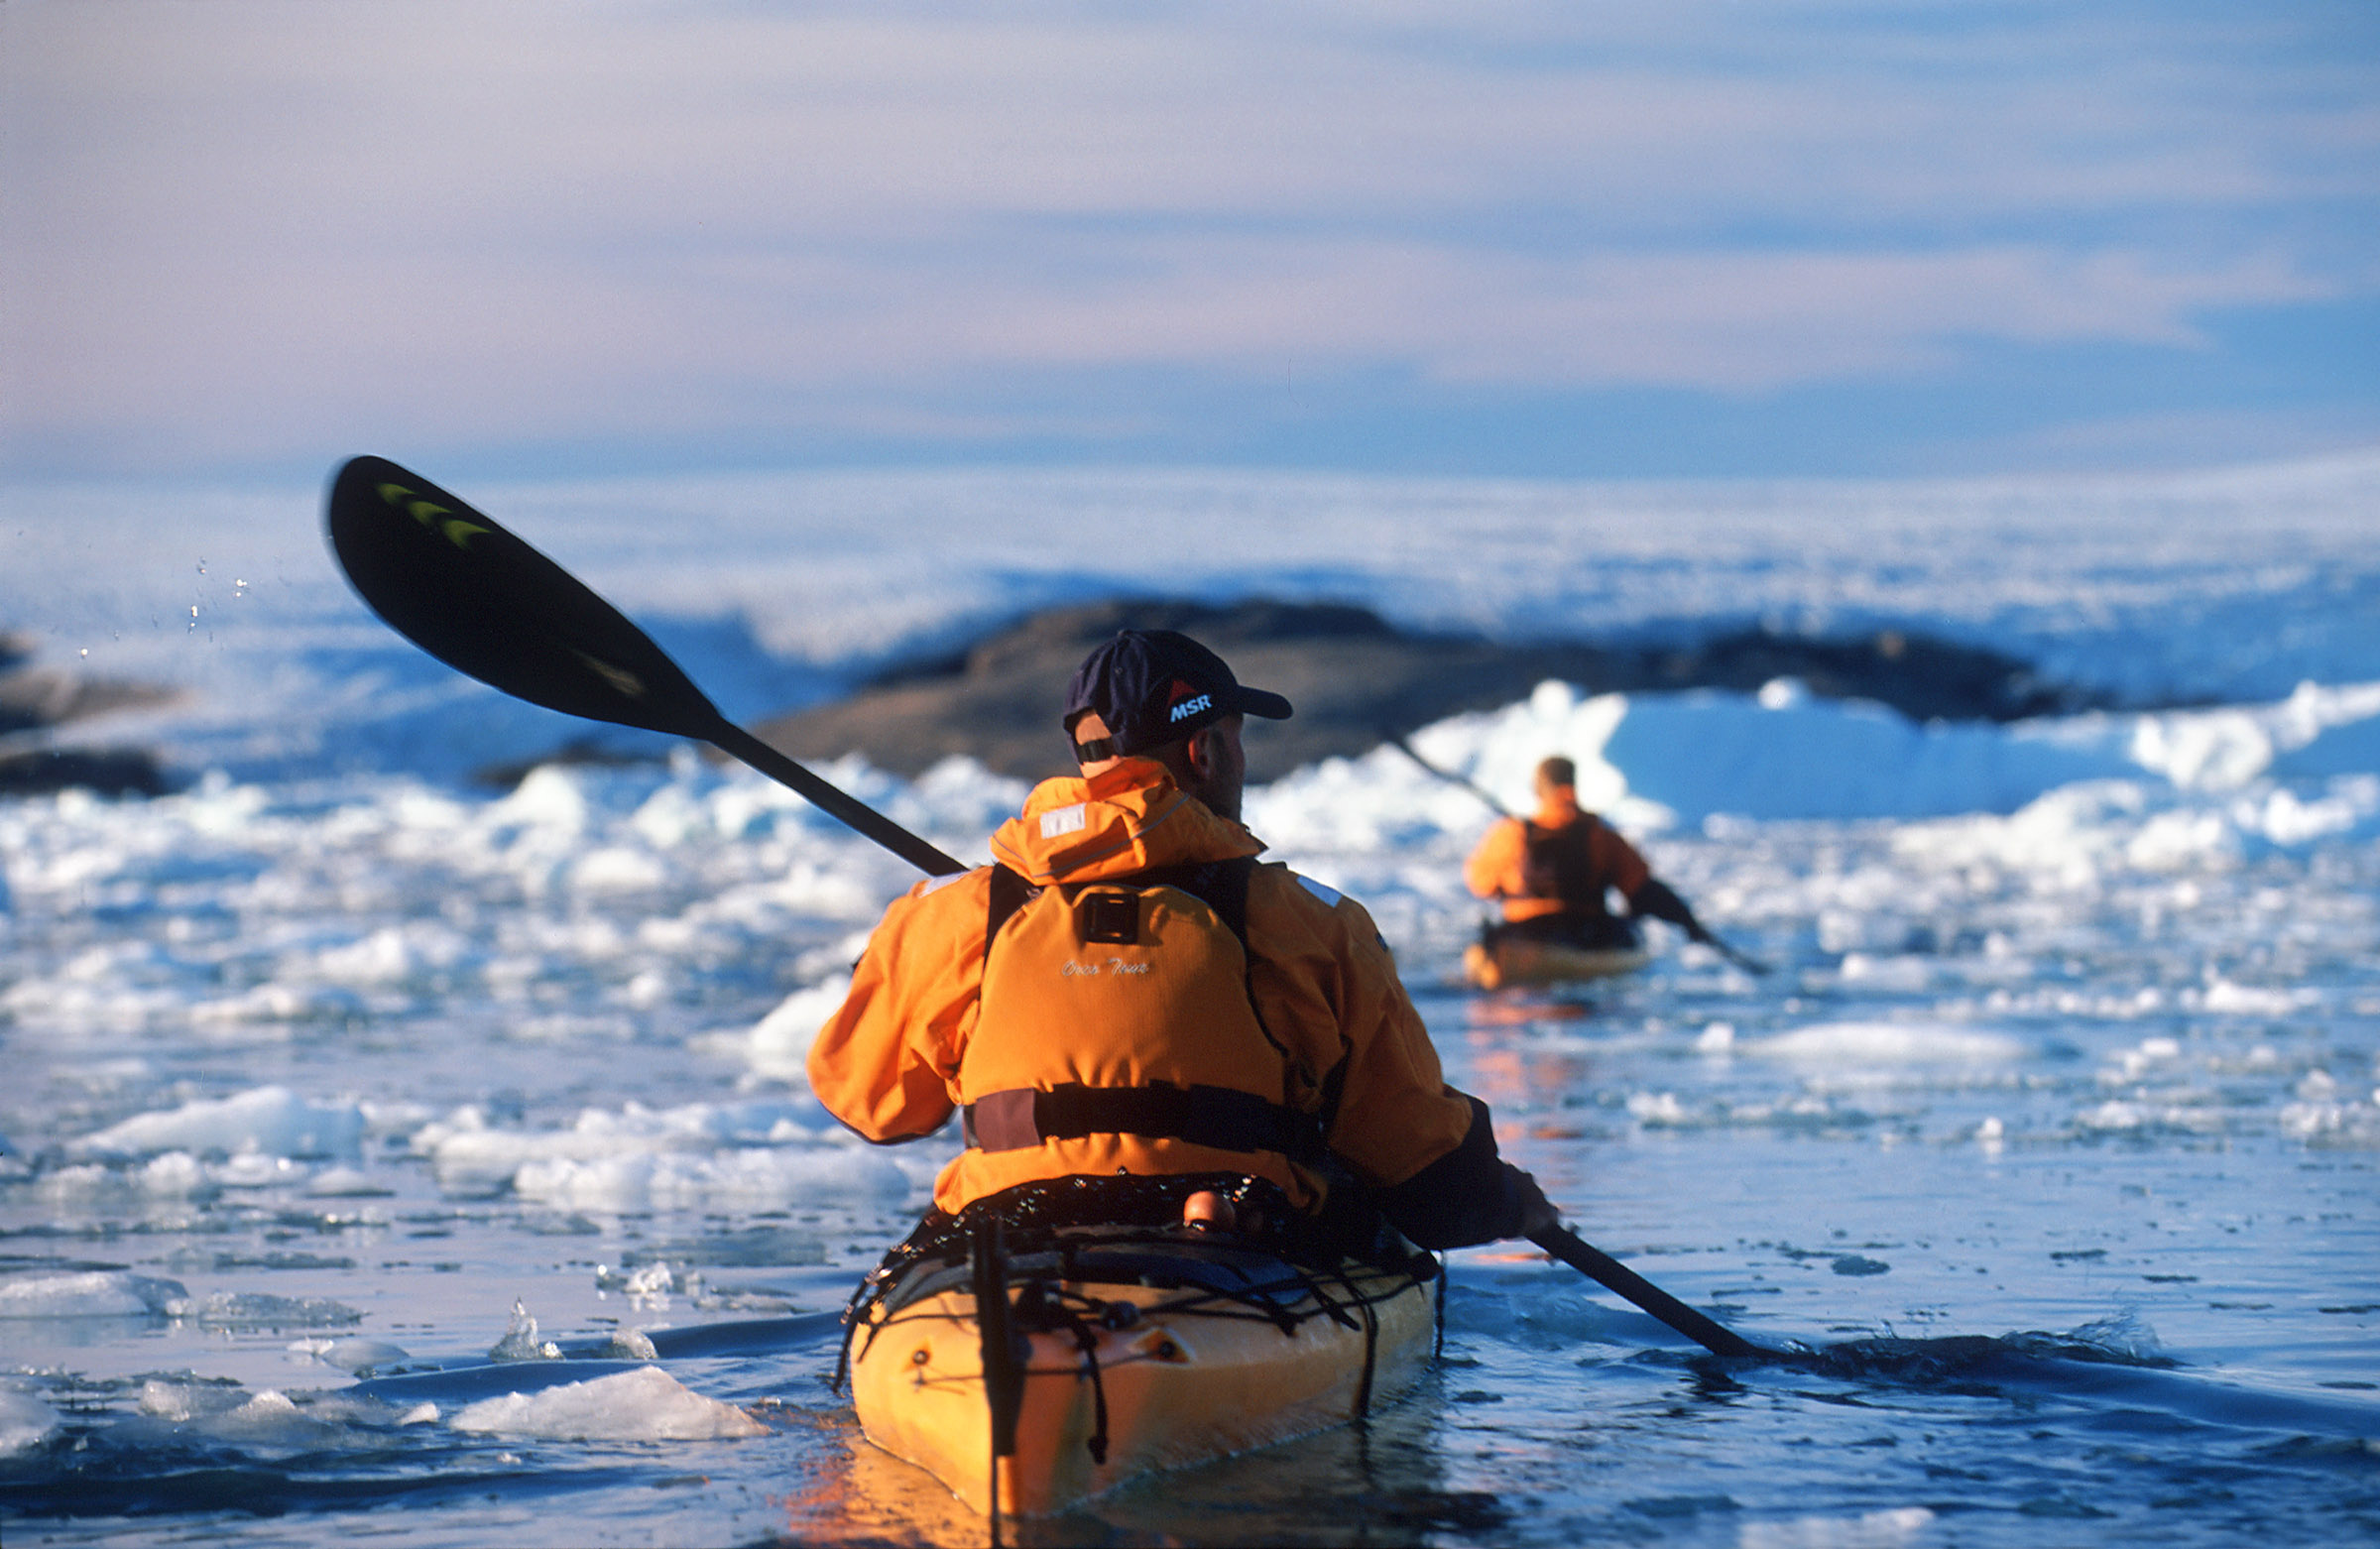 Canoeing: An official kayak expedition at Grenland sea, Useful water transport. 2400x1570 HD Wallpaper.